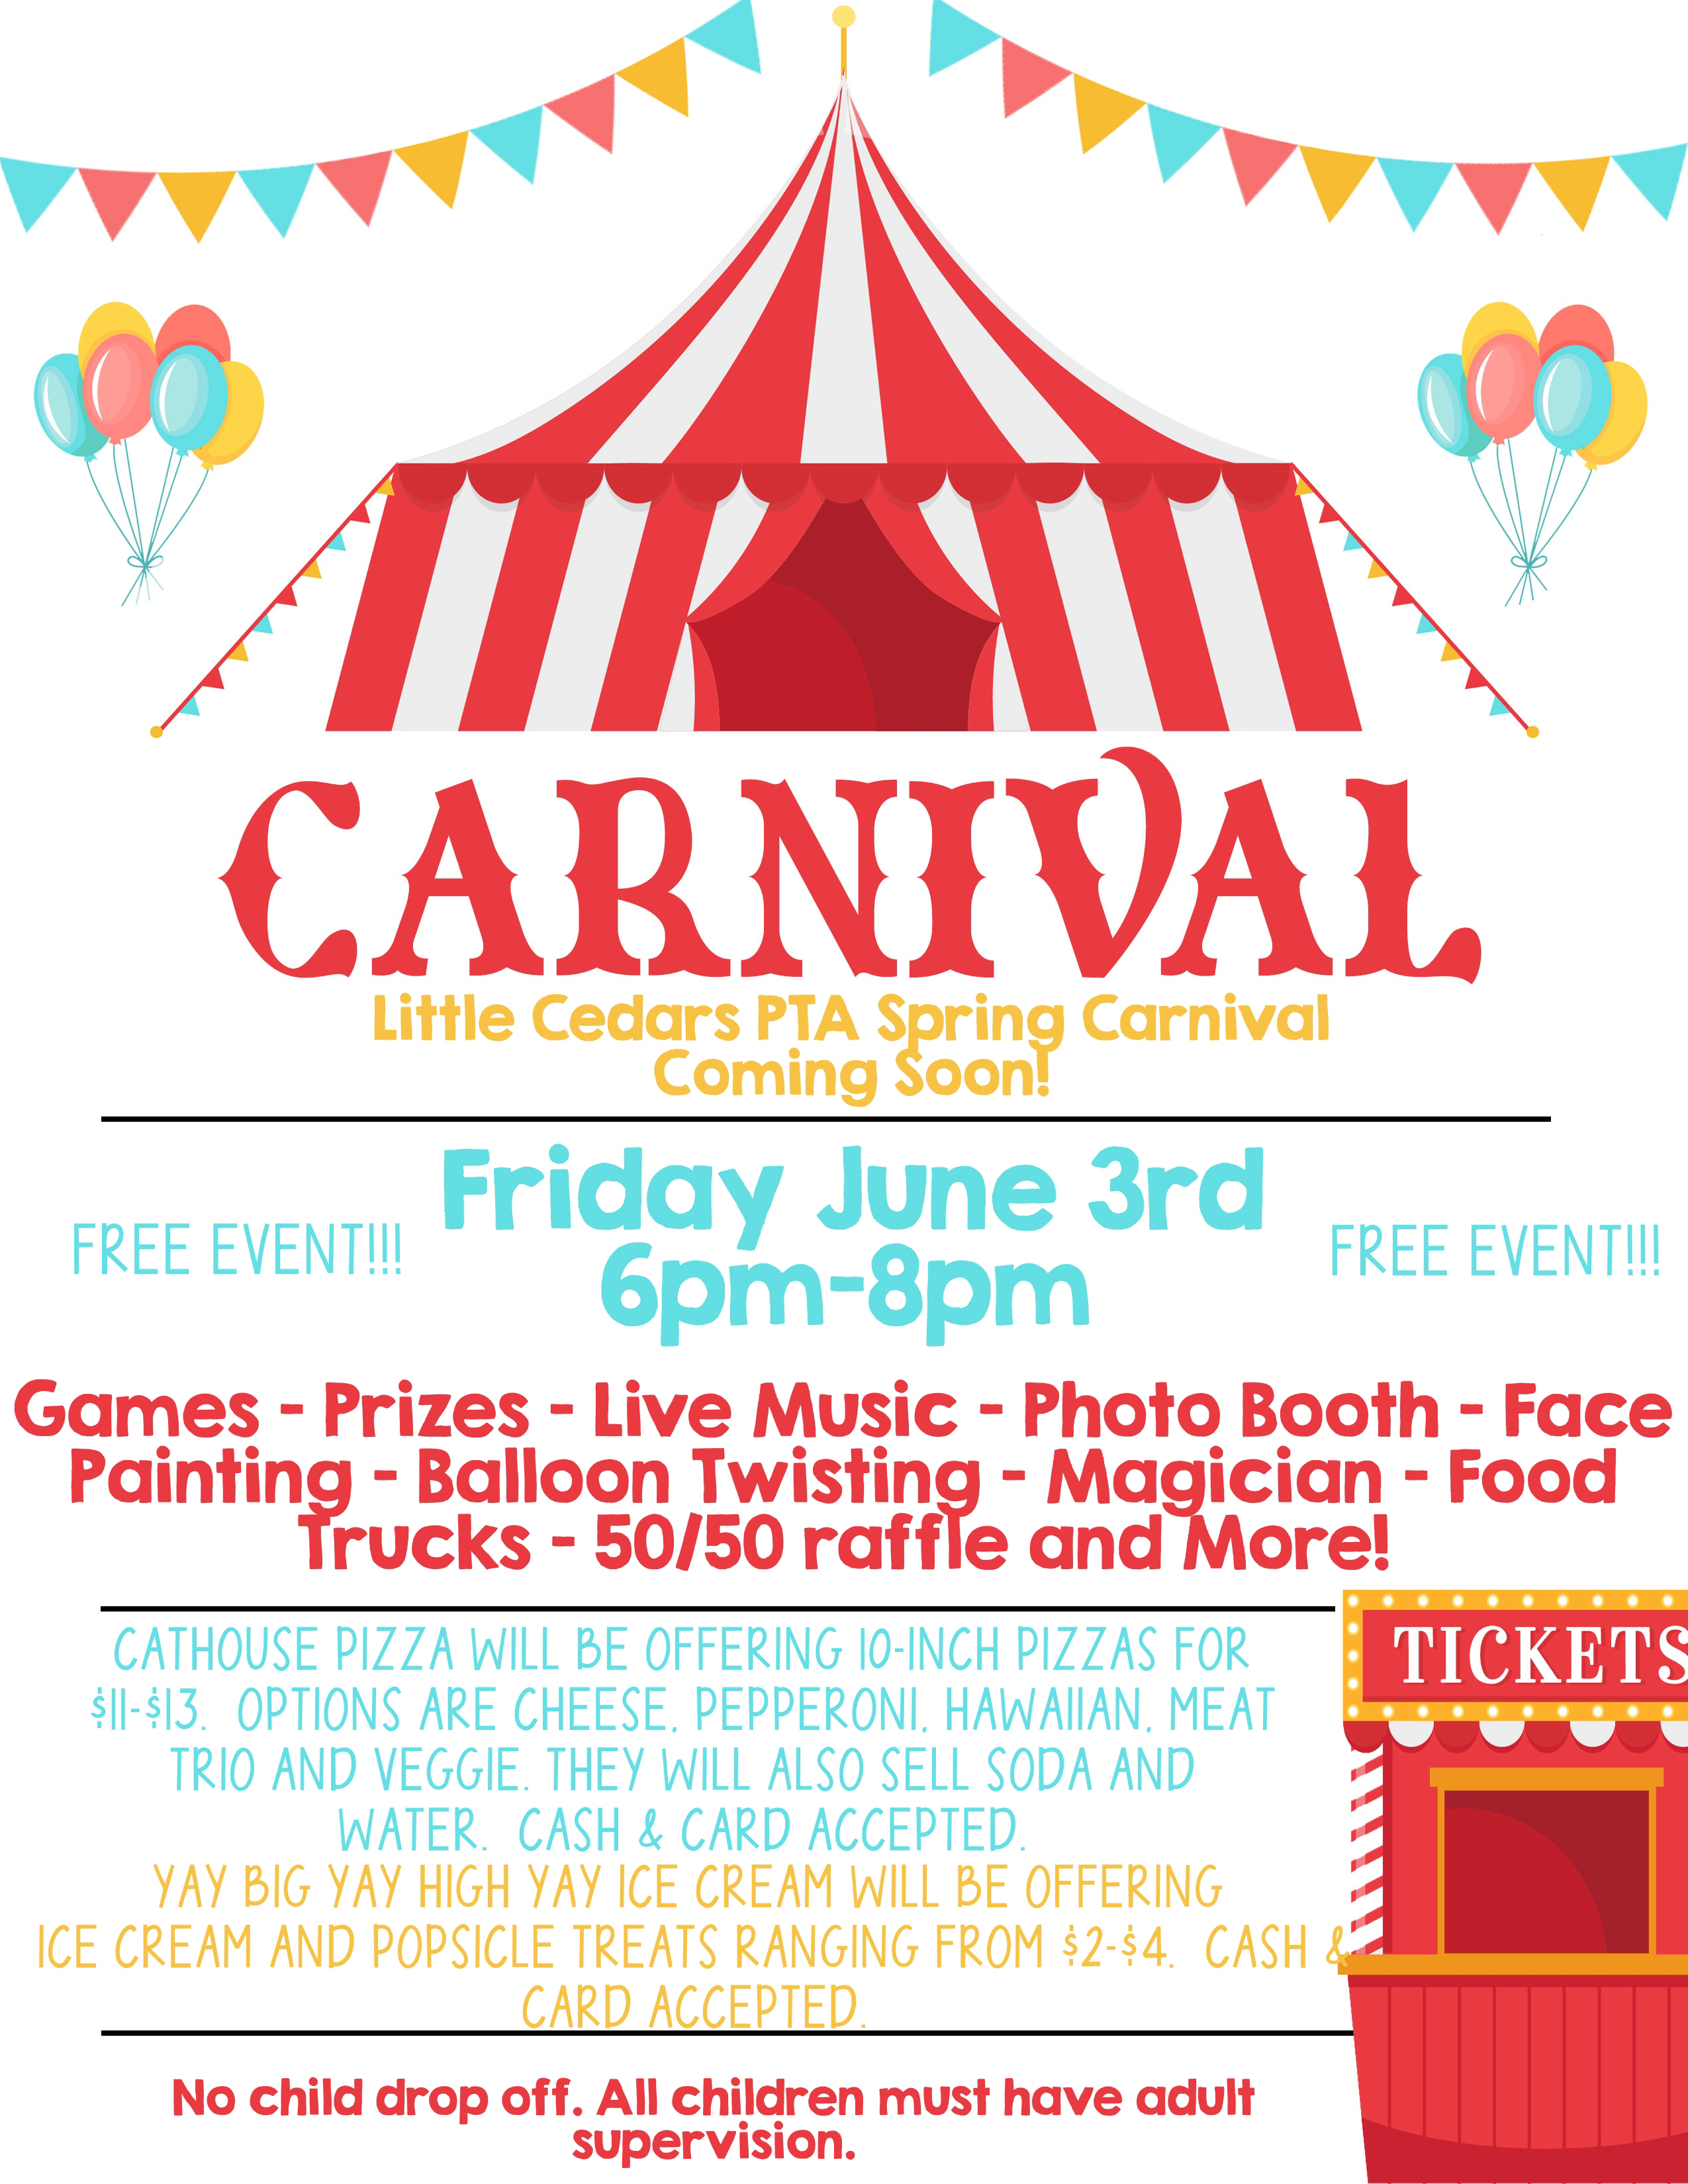 LCE Carnival Coming Soon